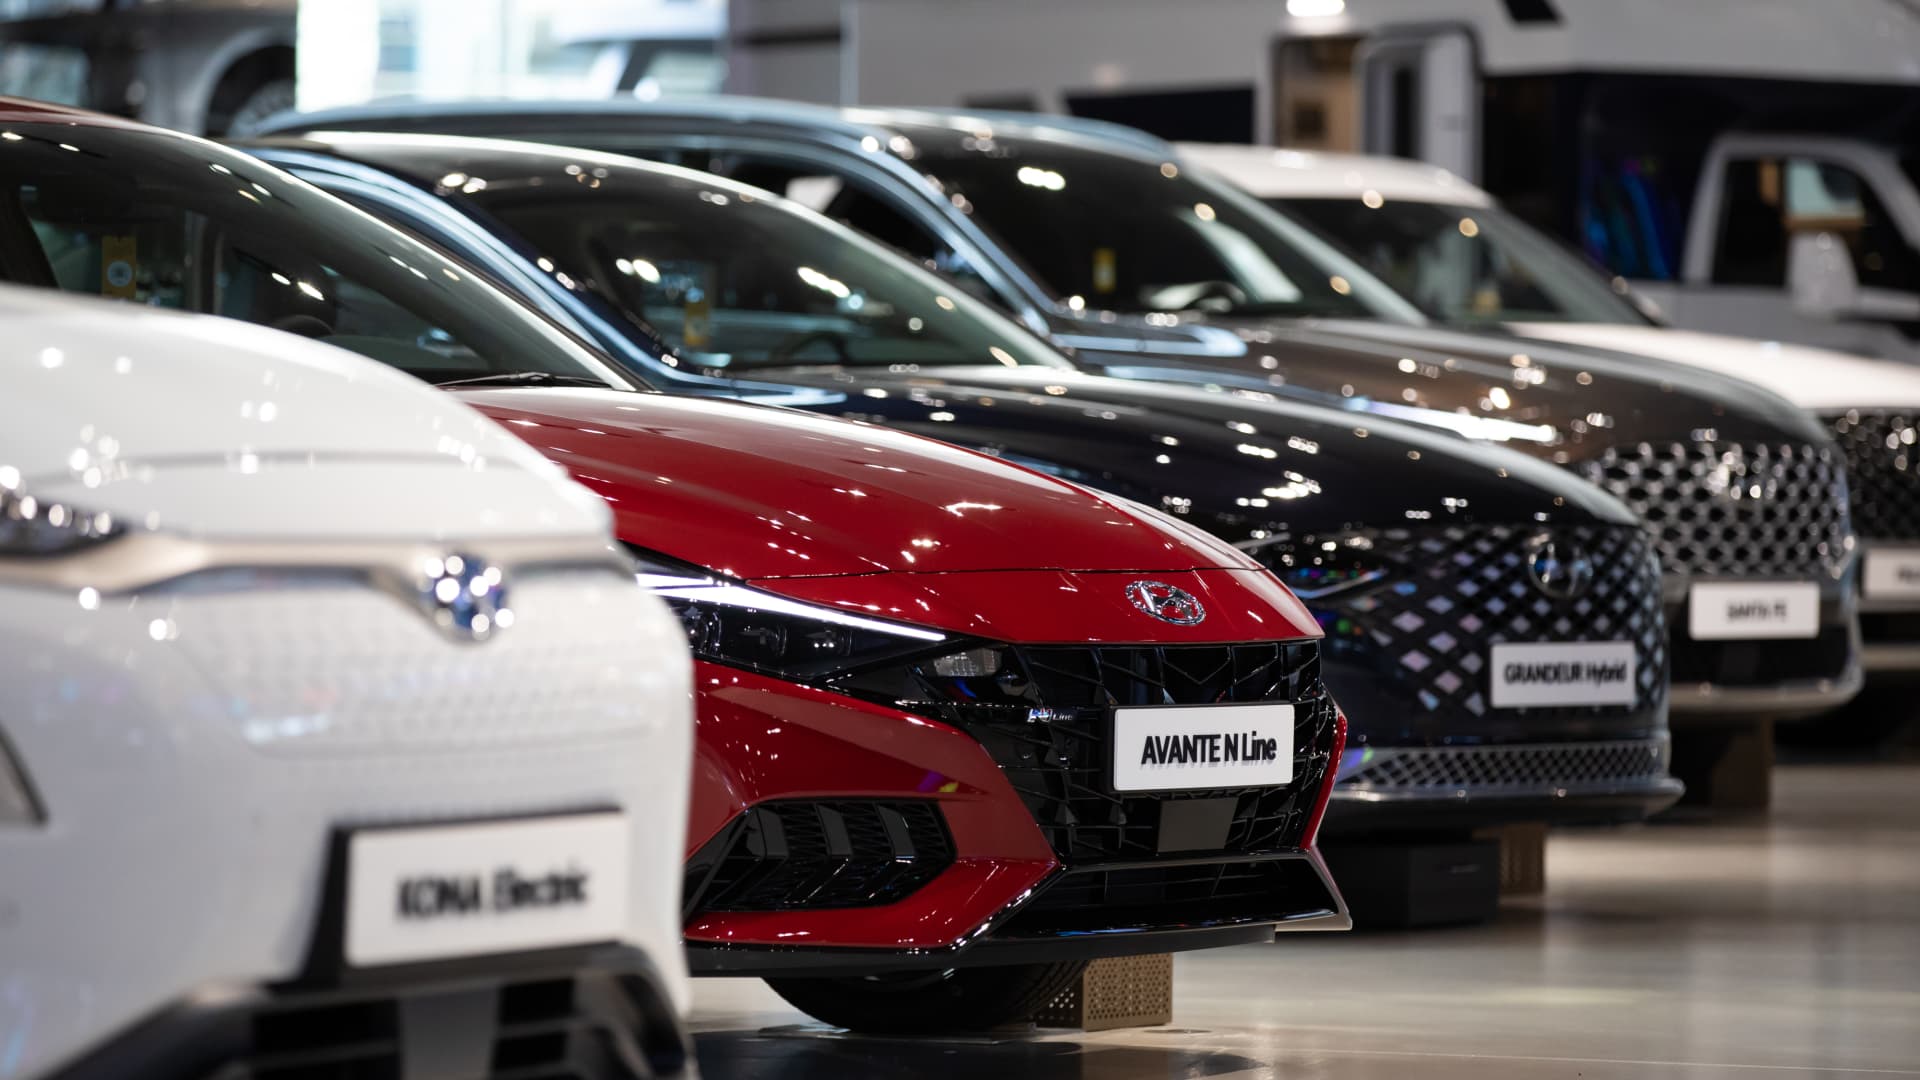 Hyundai Motor Co. vehicles are displayed at the company's Motorstudio showroom in Goyang, South Korea, on Thursday, Oct. 22, 2020.